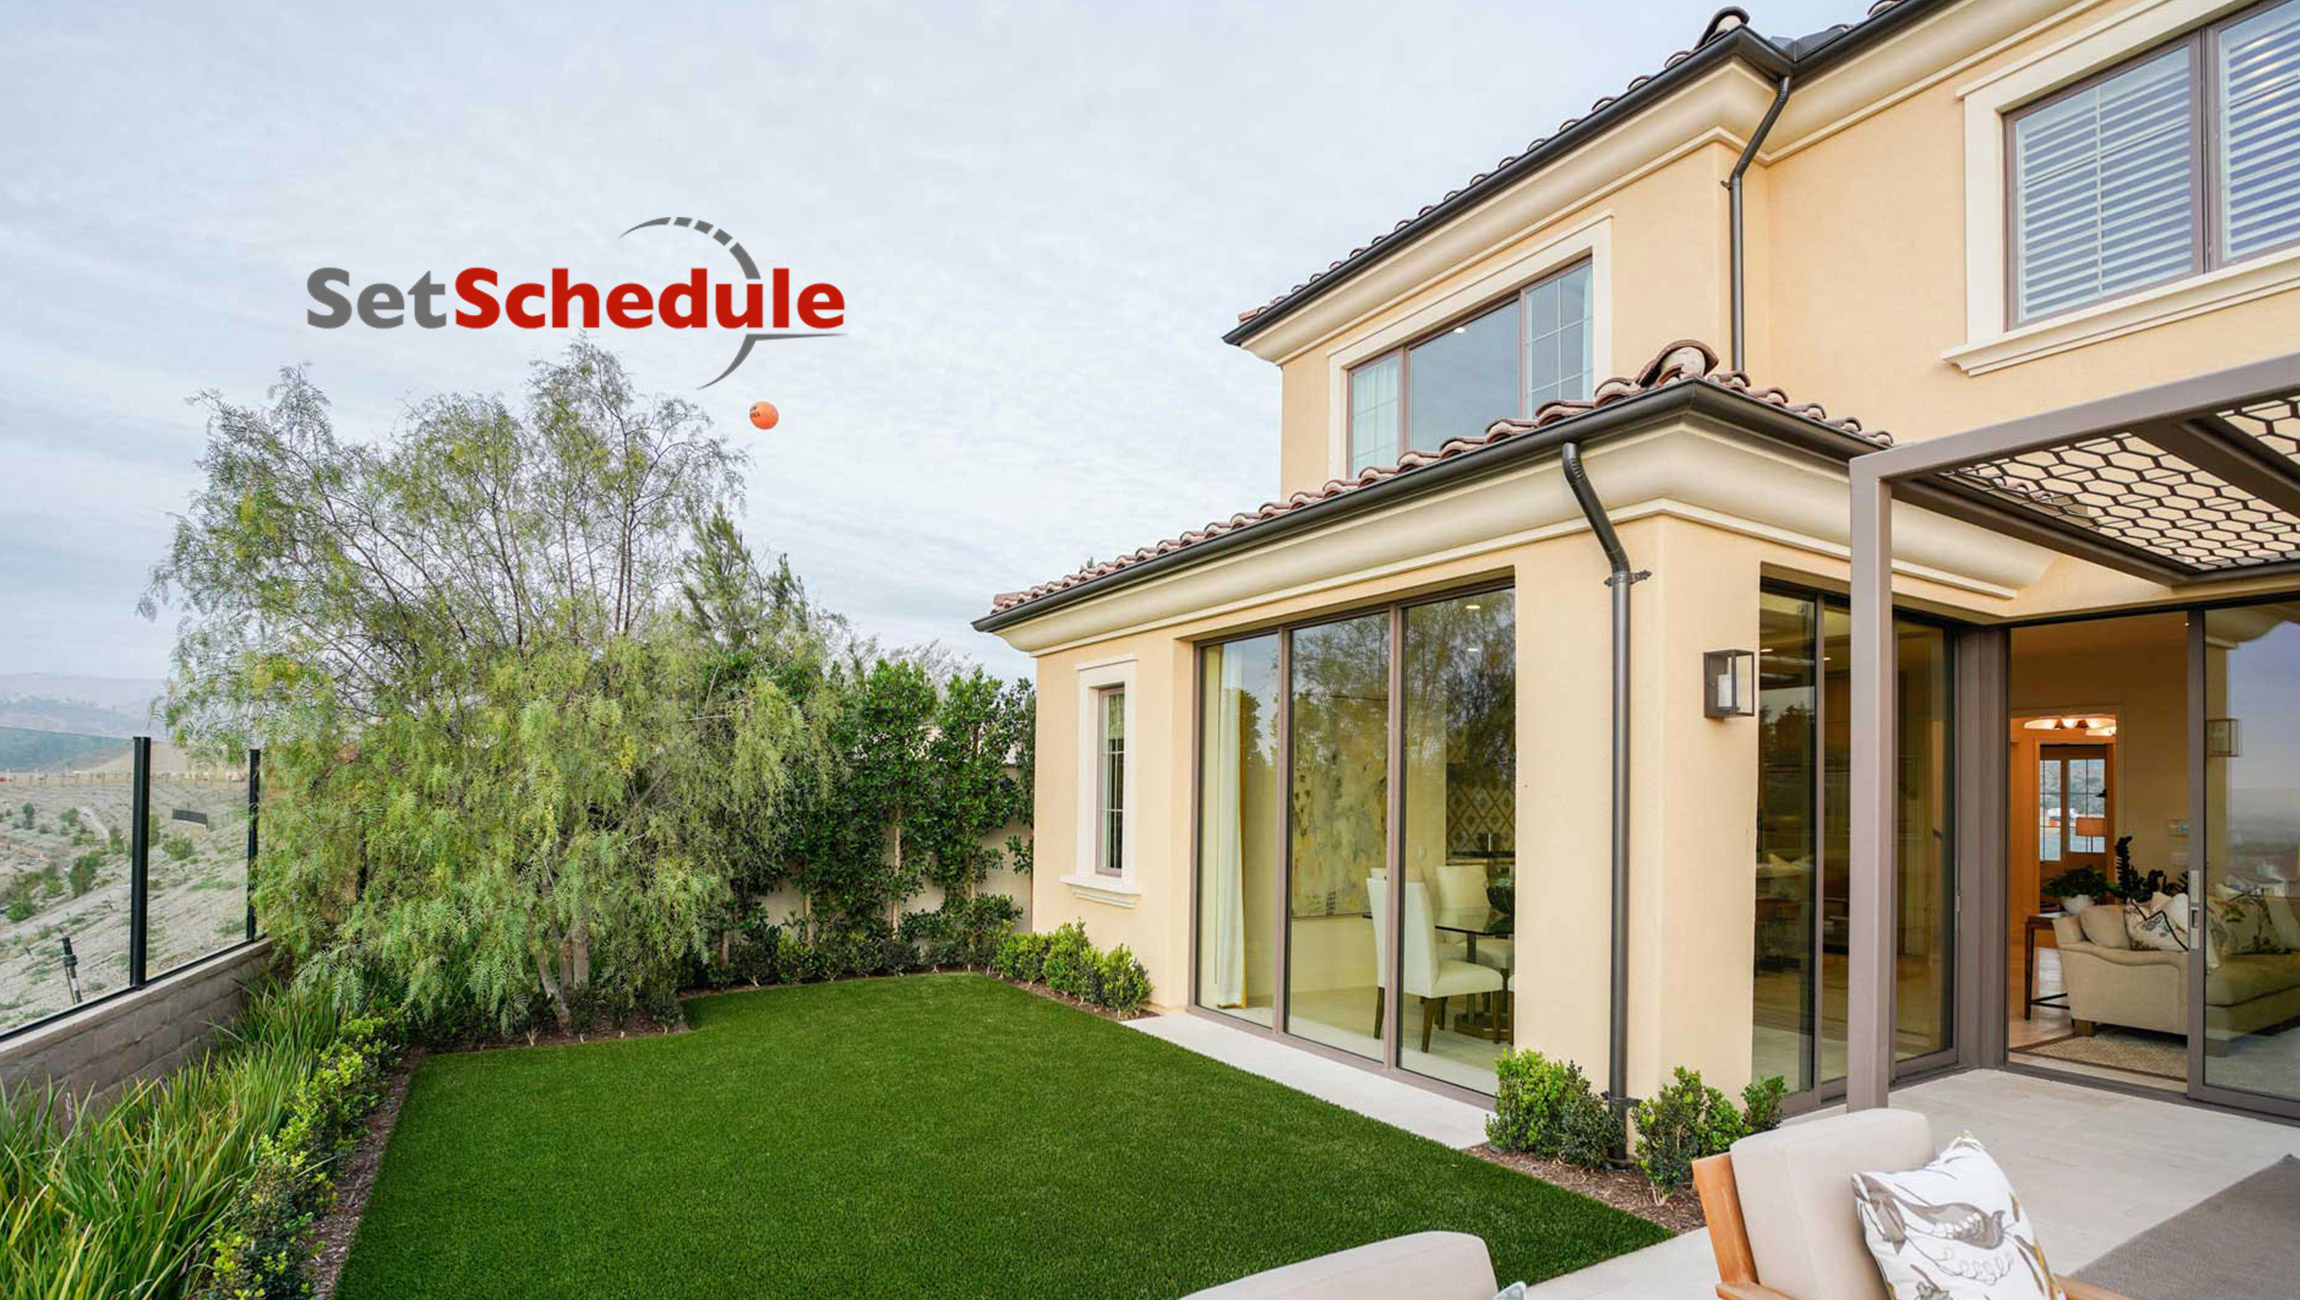 SetSchedule Take A Large Step Towards Revolutionizing the Way Real Estate Professionals Connect with Home Shoppers and Investors